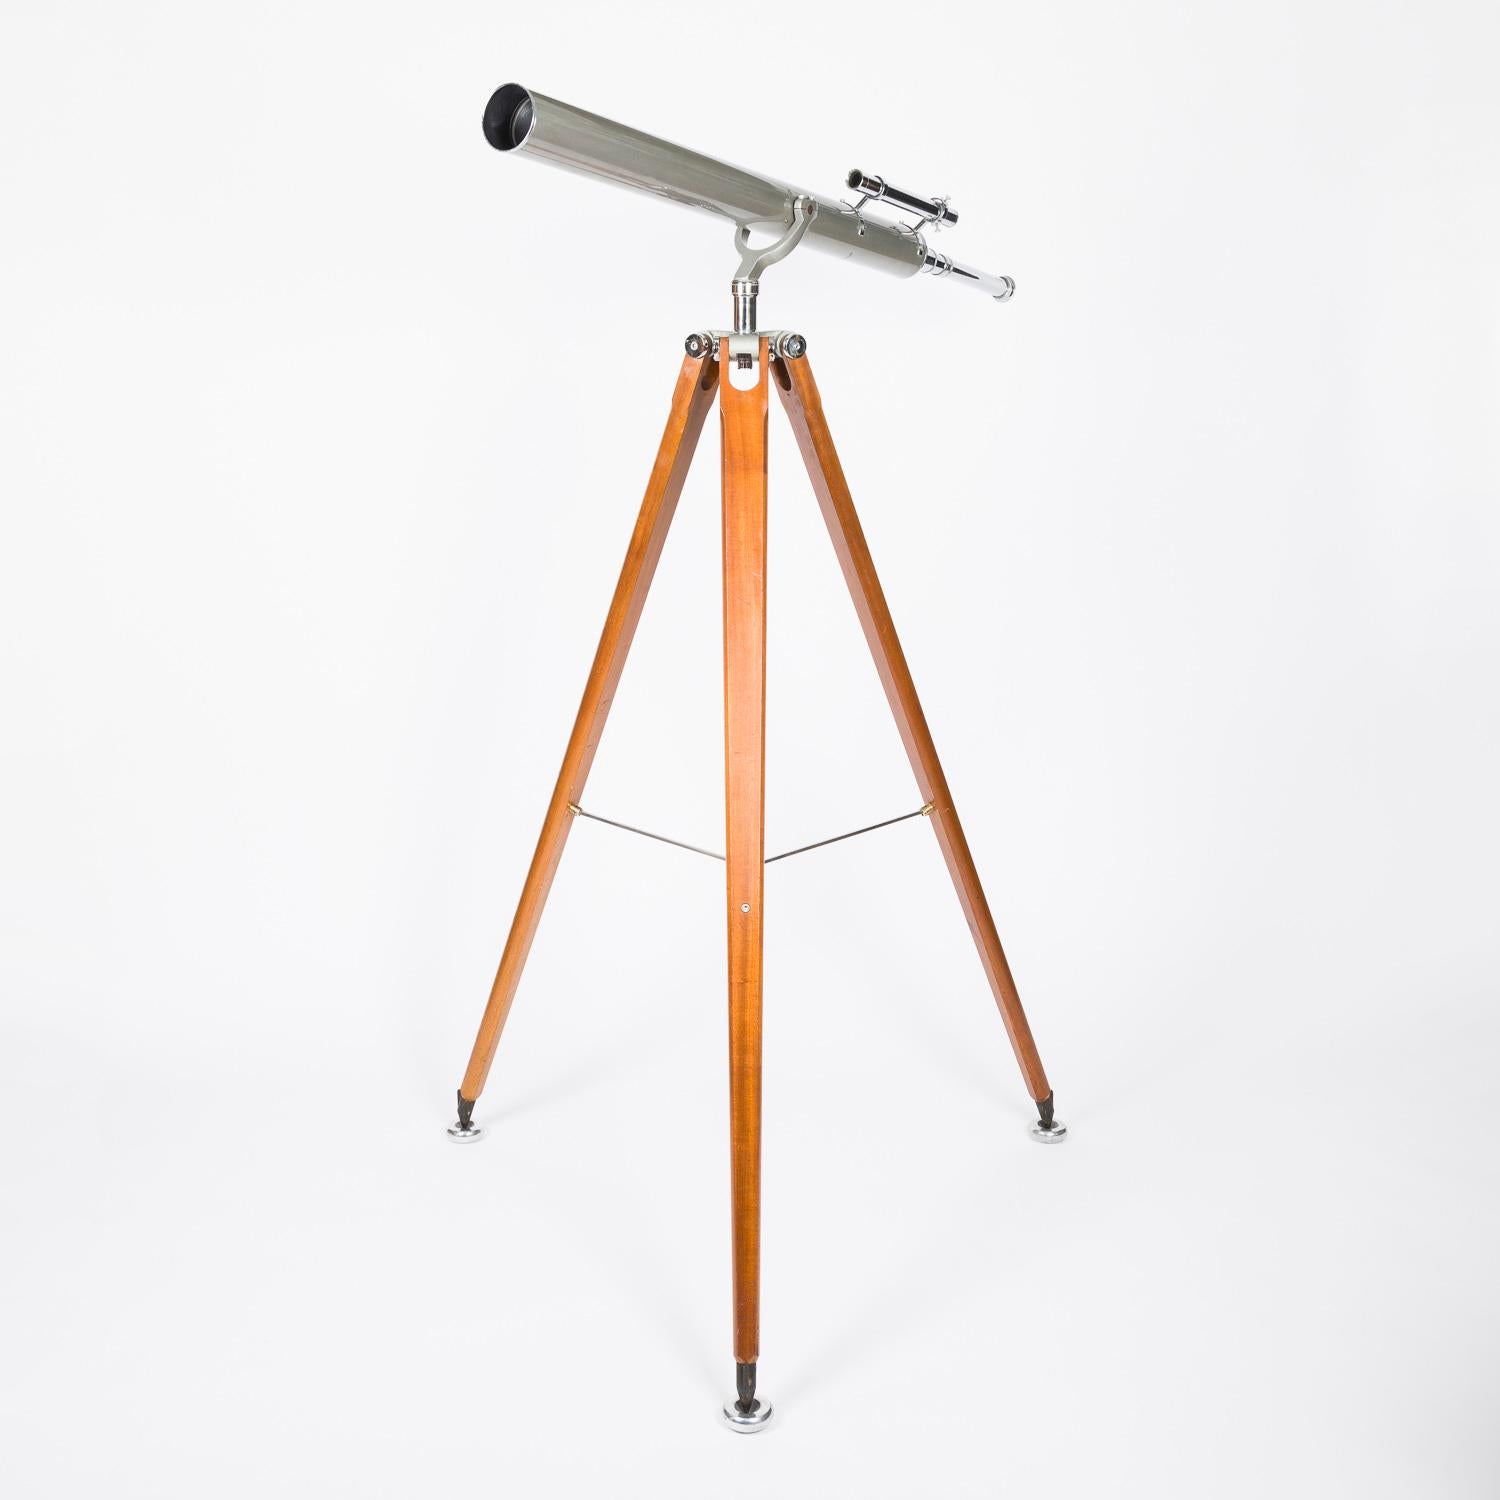 Astro tripod mounted telescope by Dollond of London 10